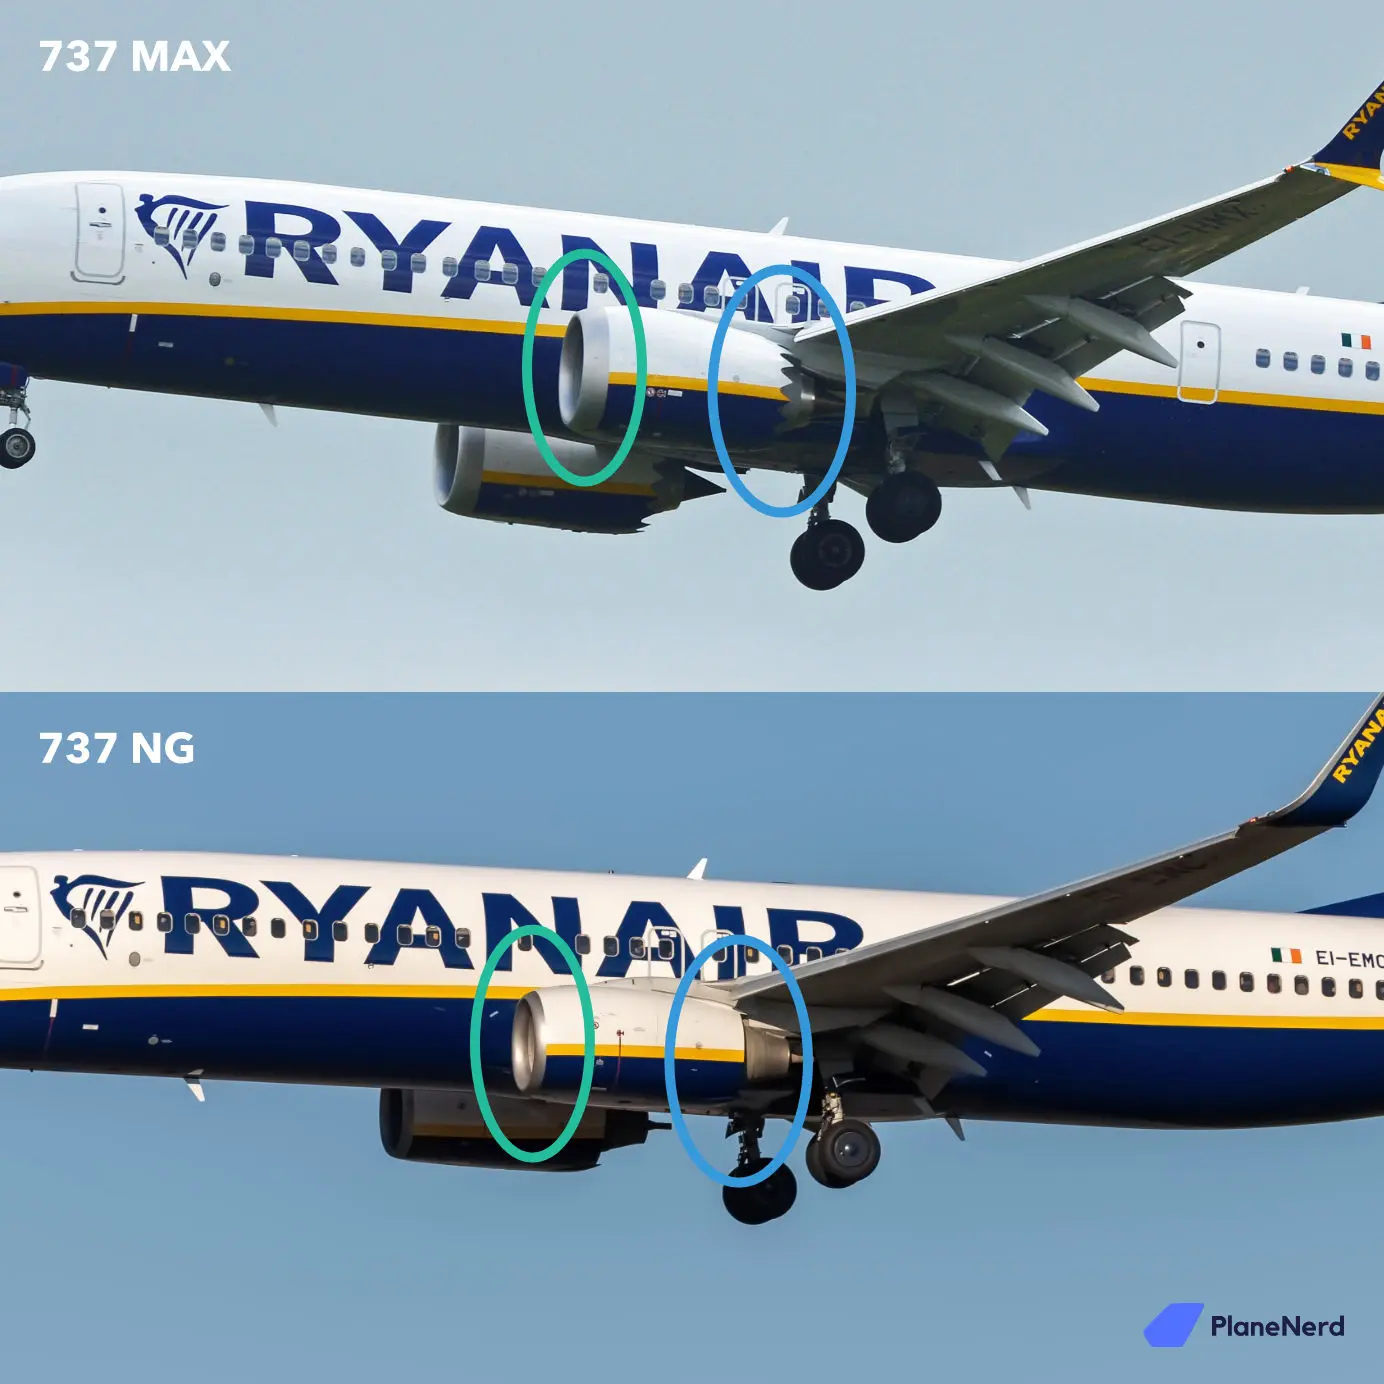 How to recognize a Boeing 737 MAX on its engines